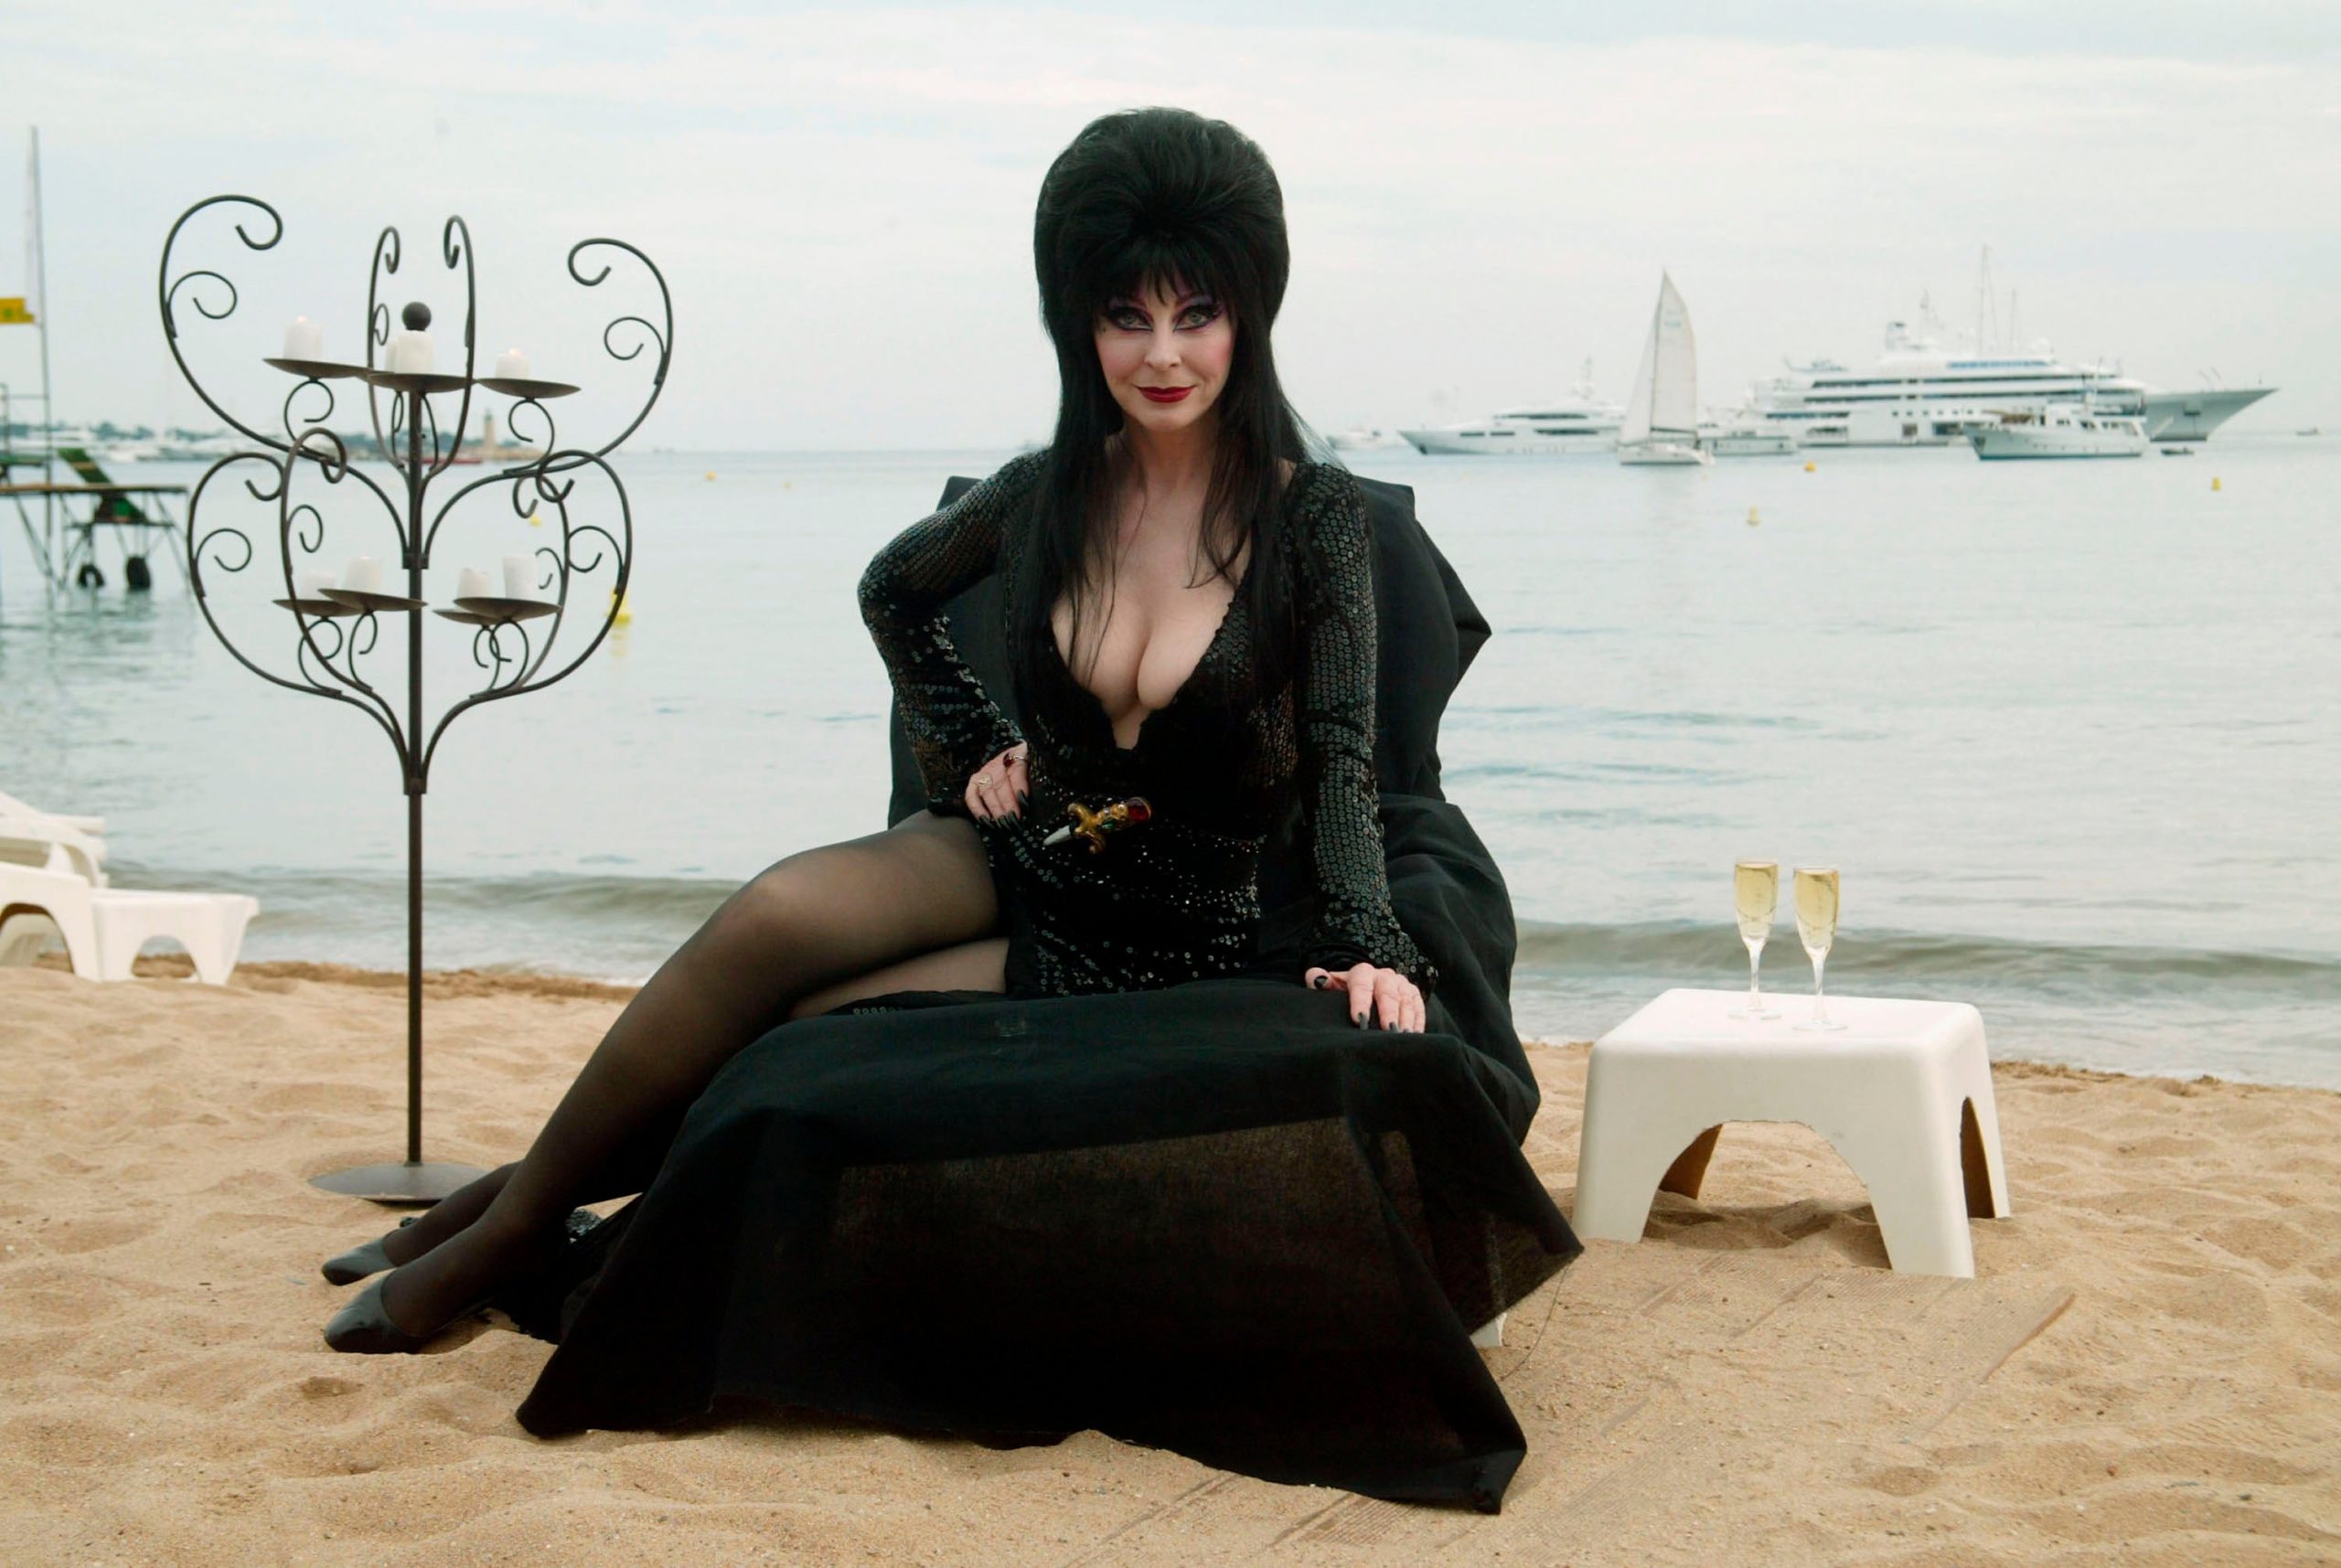 Elvira hits the beach at the 56th International Cannes Film Festival on May 17, 2003. (Photo: Evan Agostini, Getty Images)